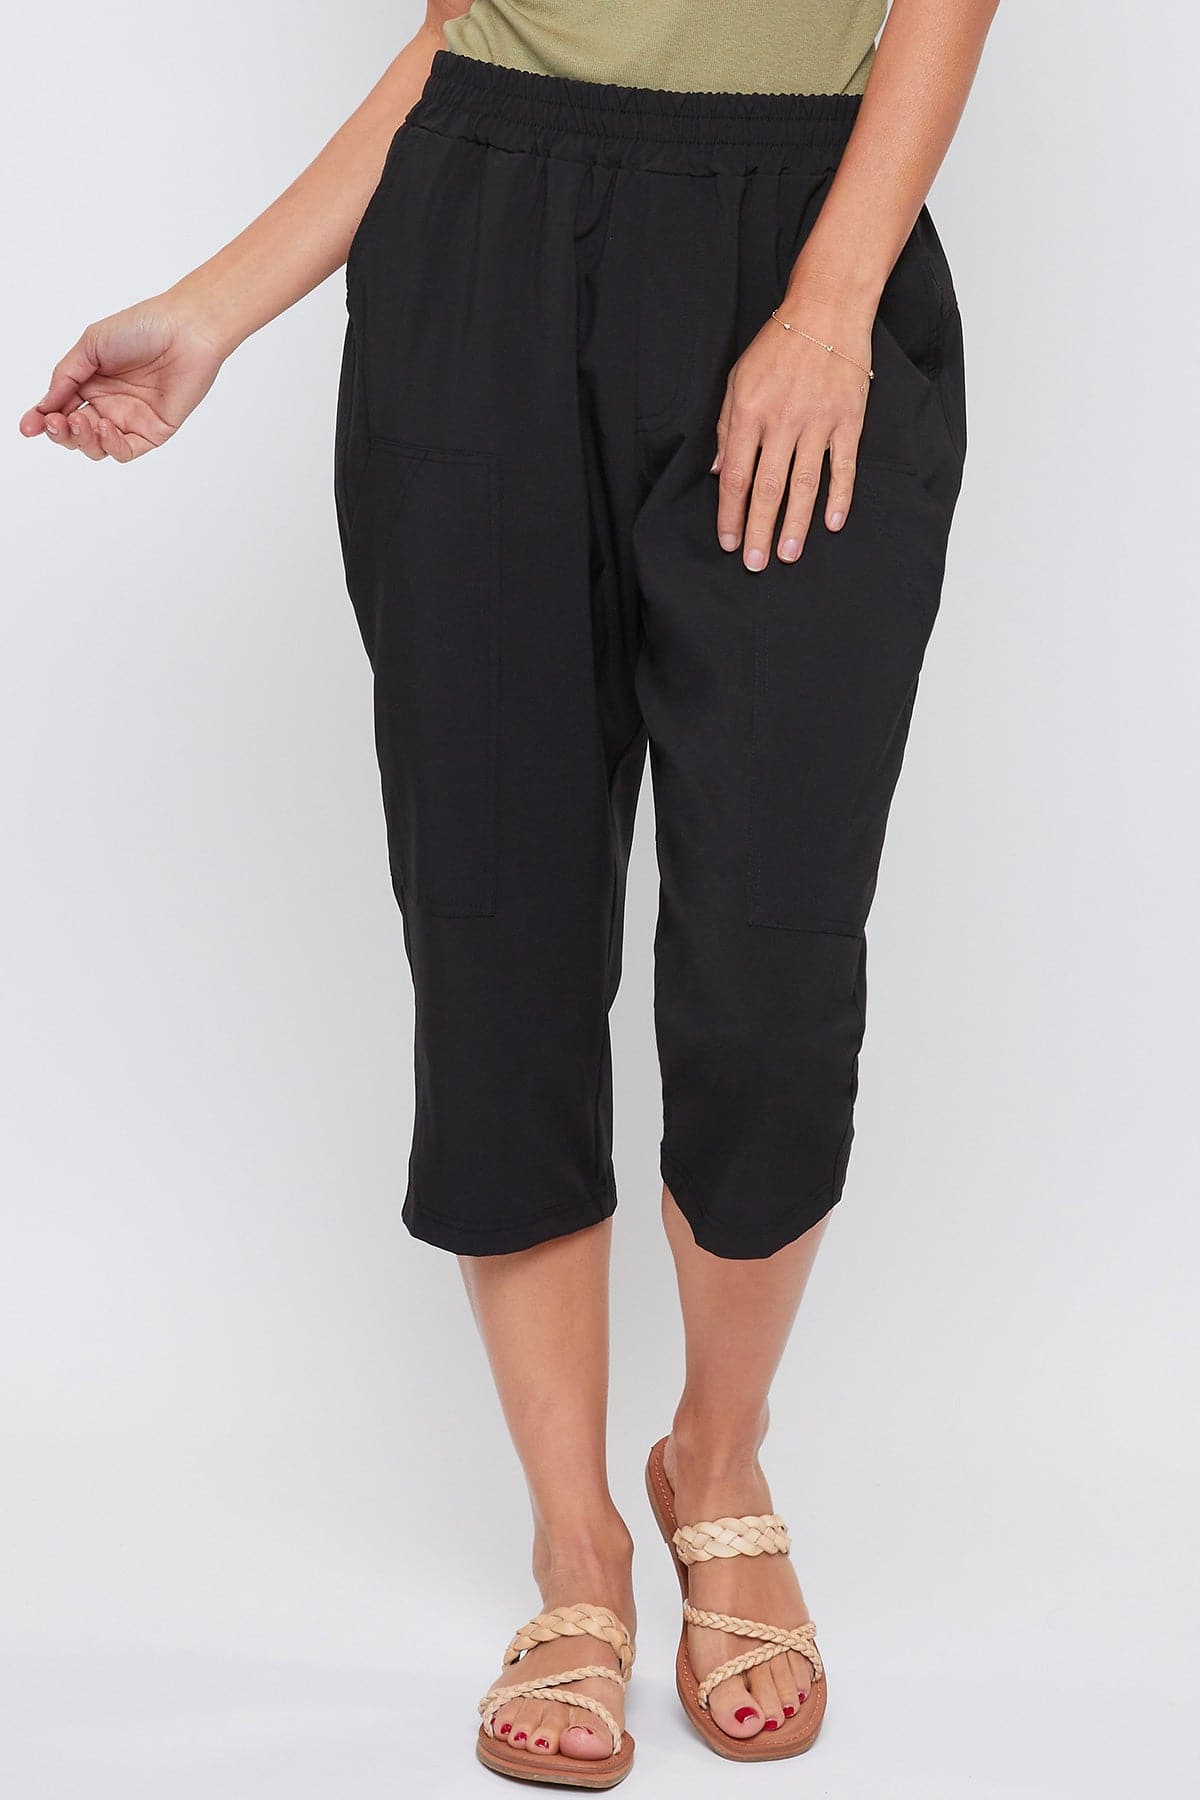 Women's Pull-On Capris With Big Pocket Detail-Sale